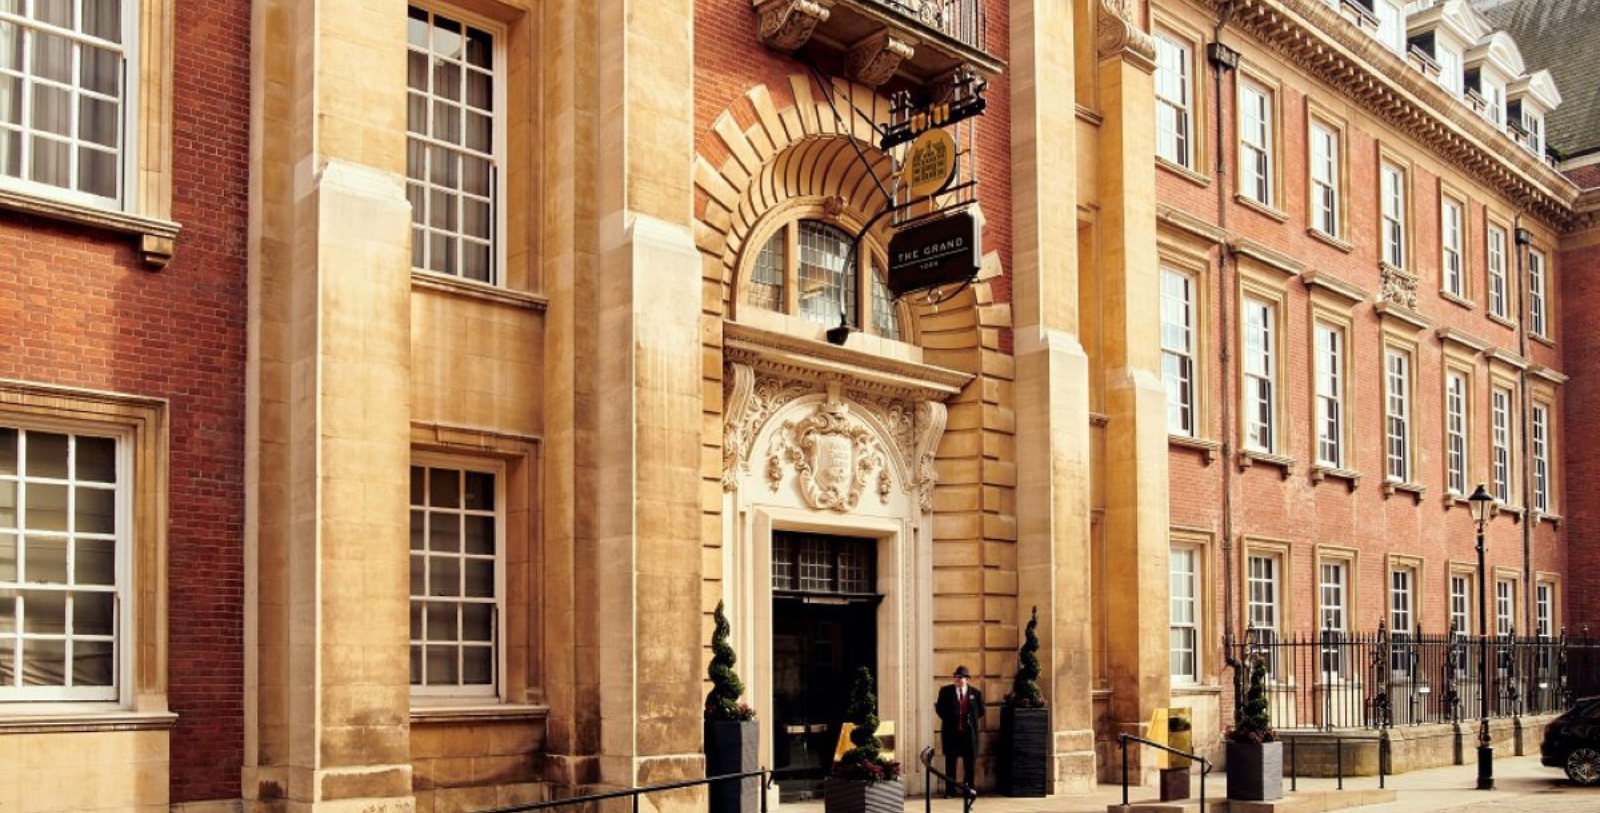 Image of Hotel Exterior The Grand York, 1906, Member of Historic Hotels Worldwide, in York, England, United Kingdom, Overview